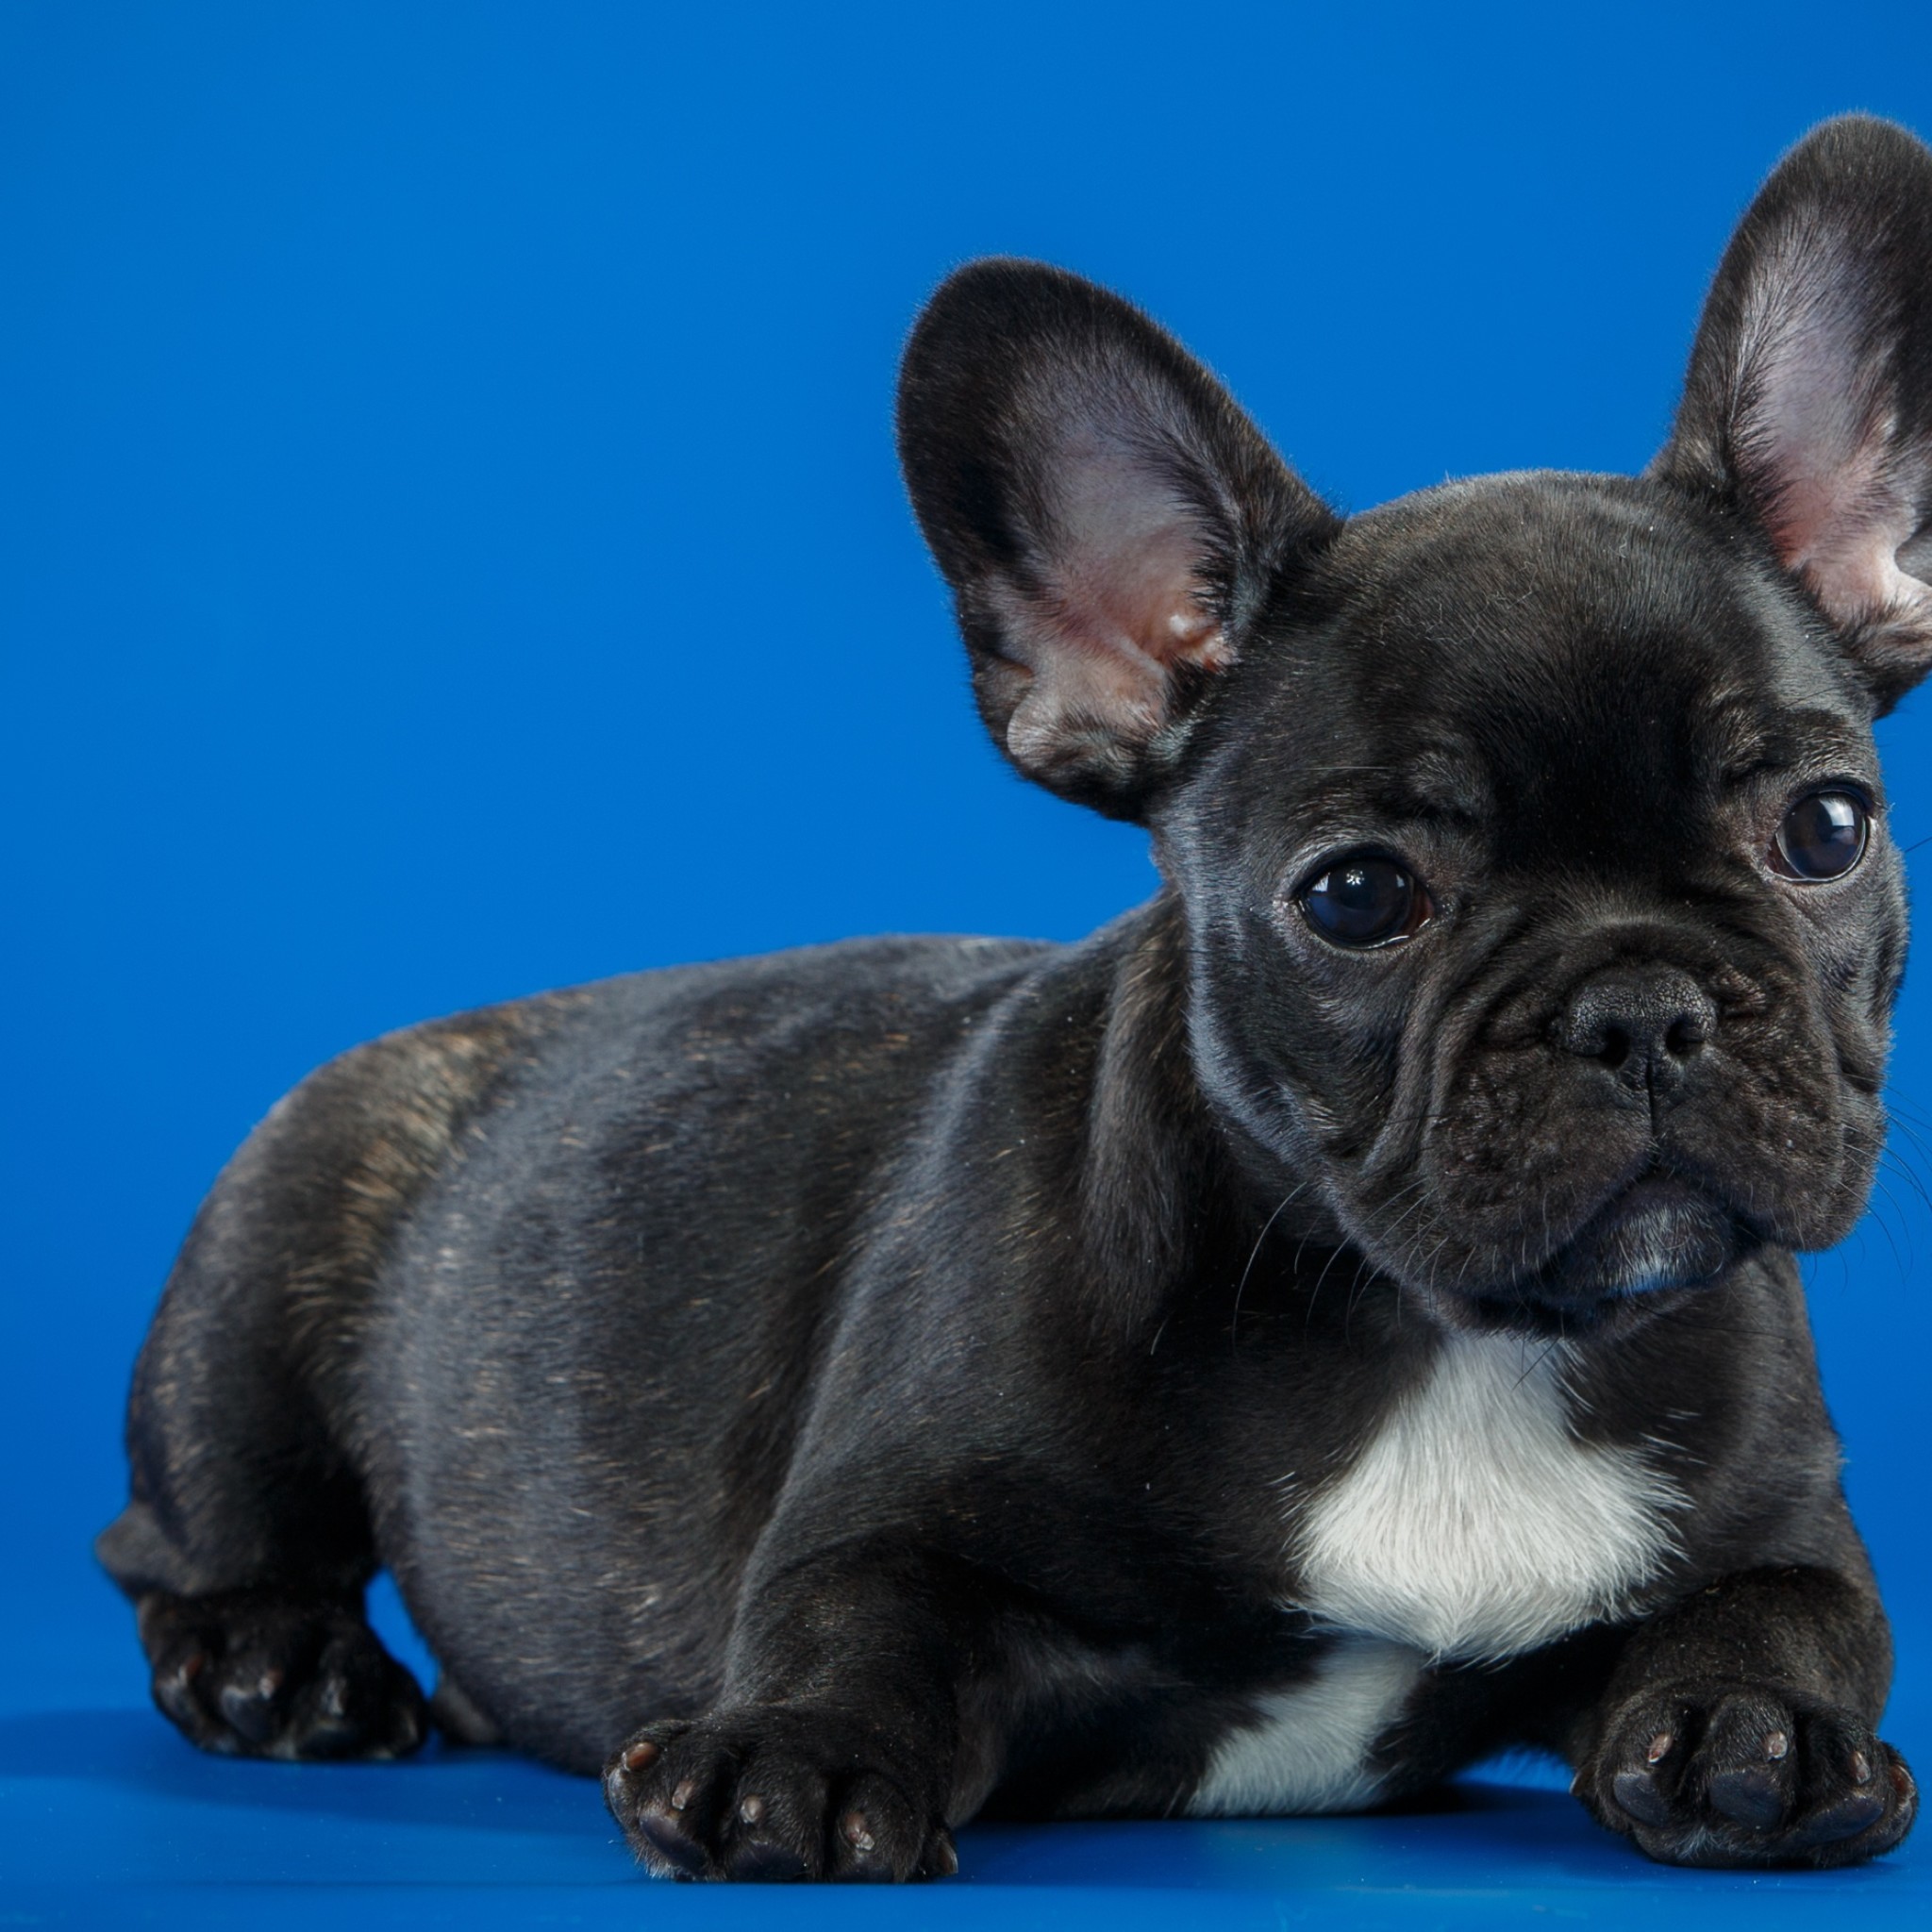 Real French Bulldog For Sale In Uae Cheap , HD Wallpaper & Backgrounds